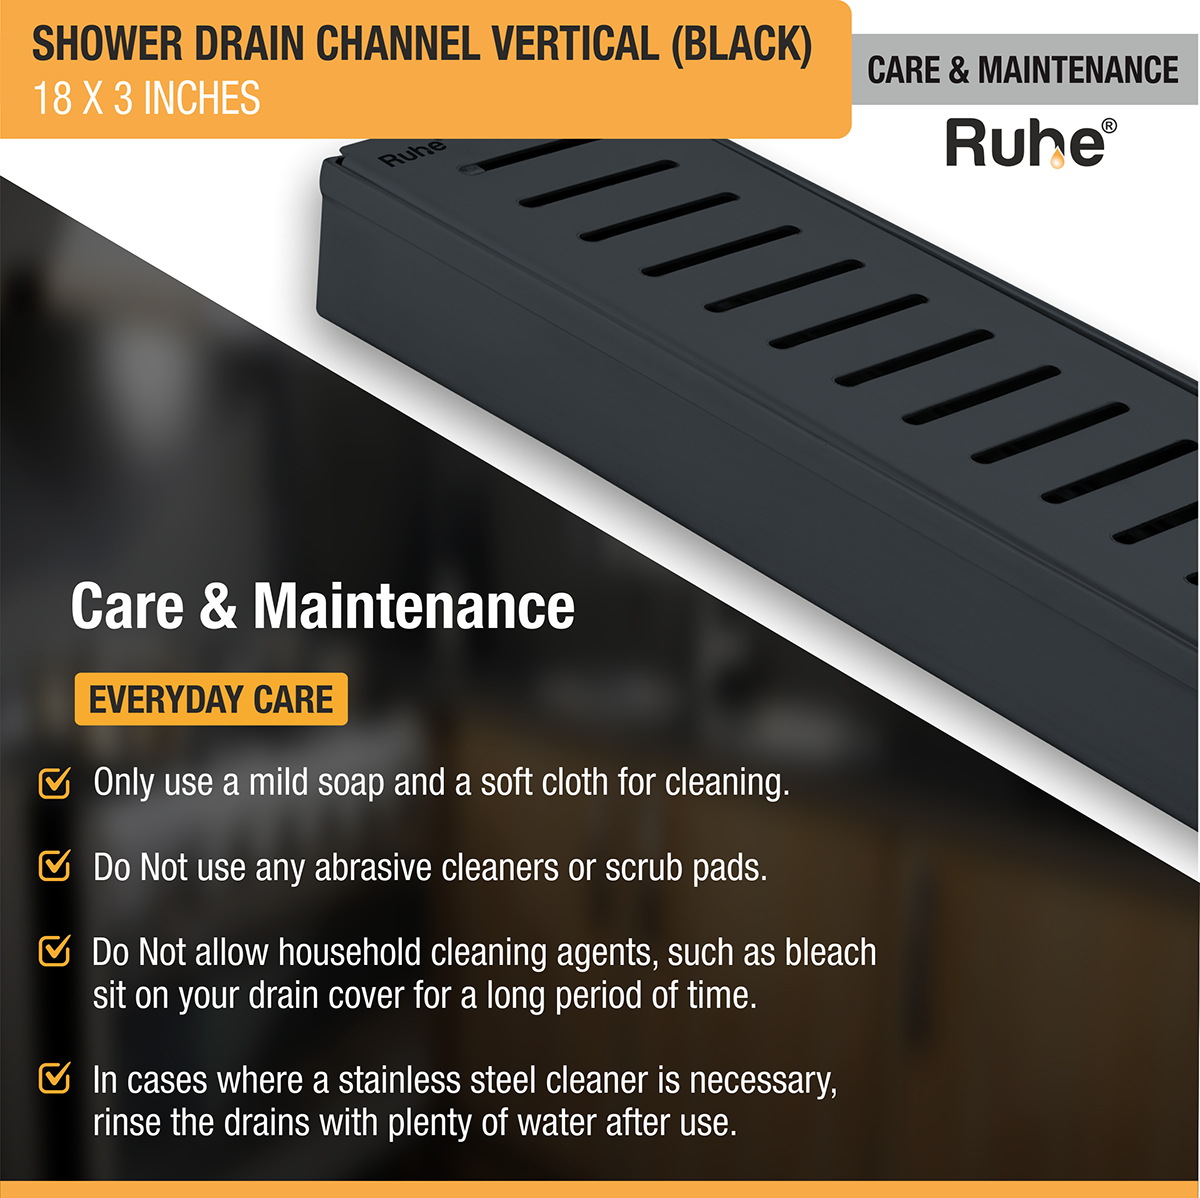 Vertical Shower Drain Channel (18 x 3 Inches) Black PVD Coated care and maintenance